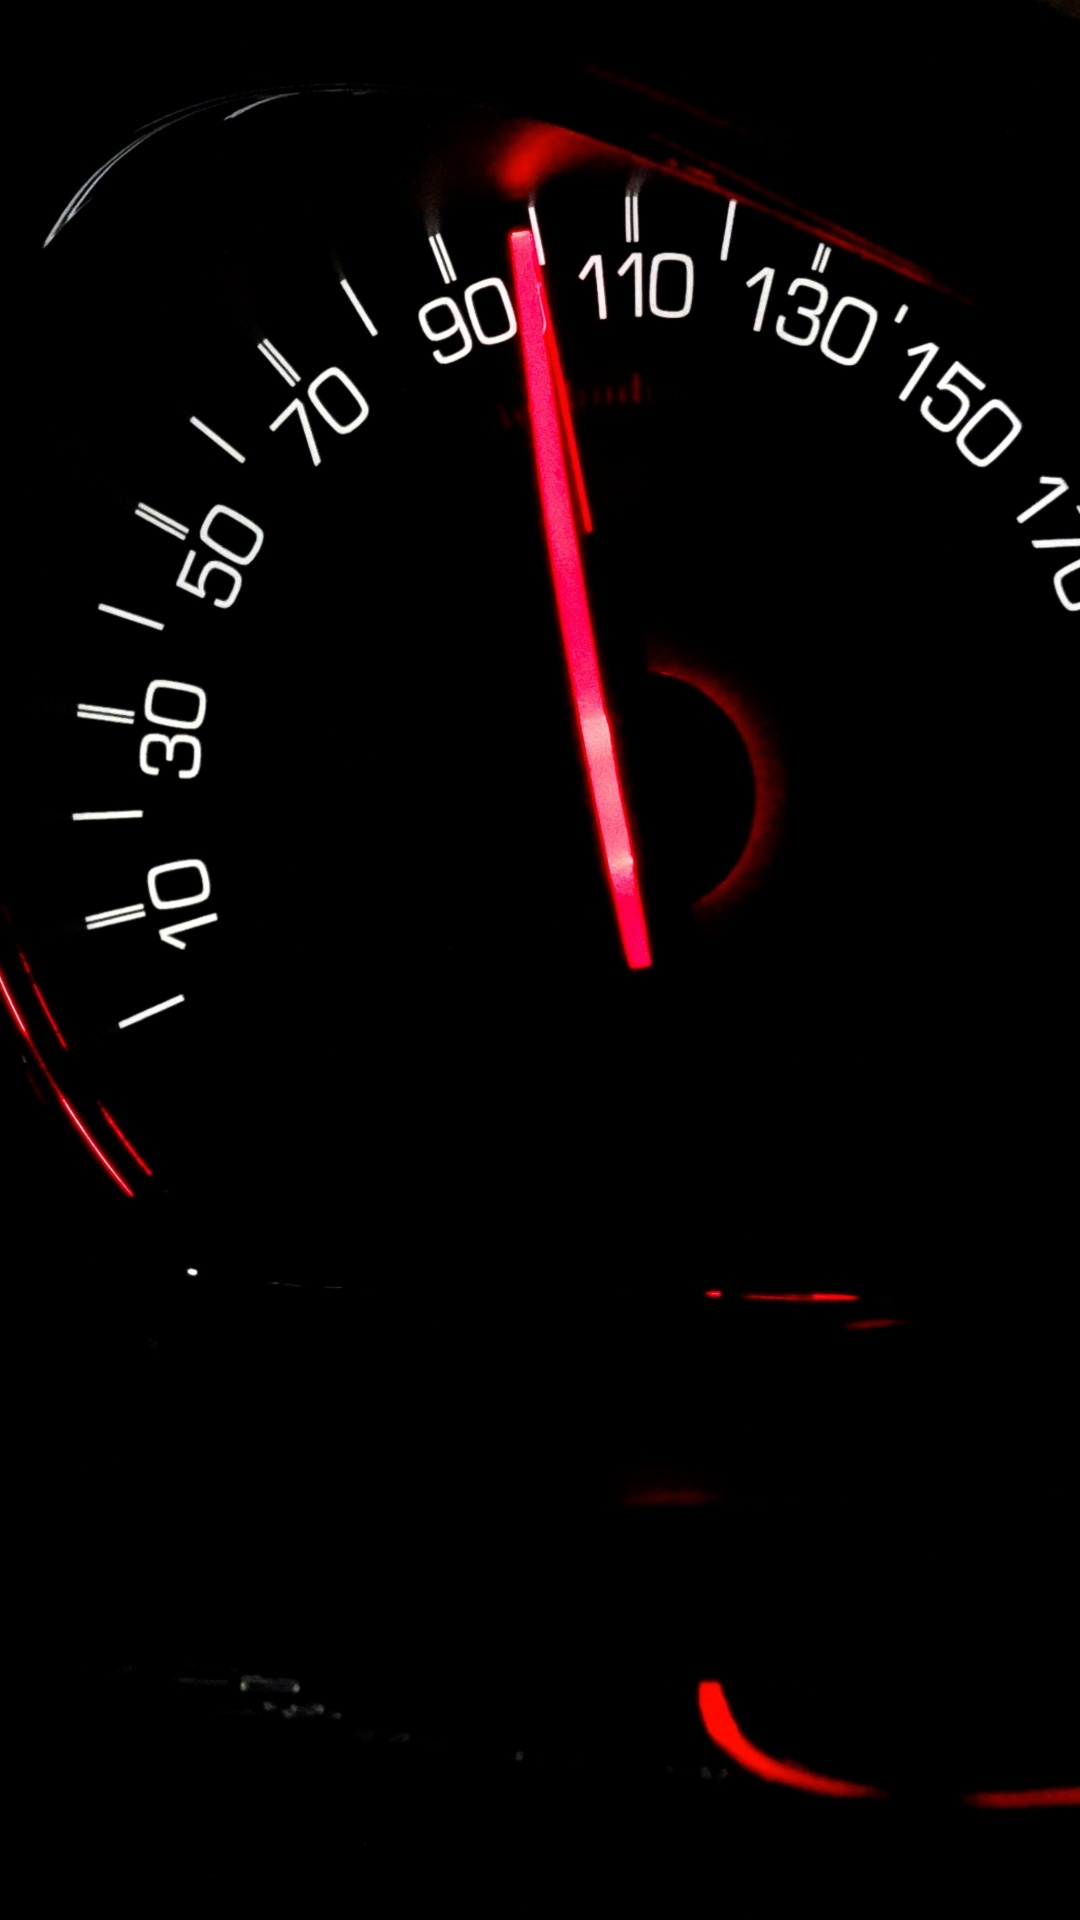 Black and Red Speedometer at 0. Wallpaper in 1080x1920 Resolution